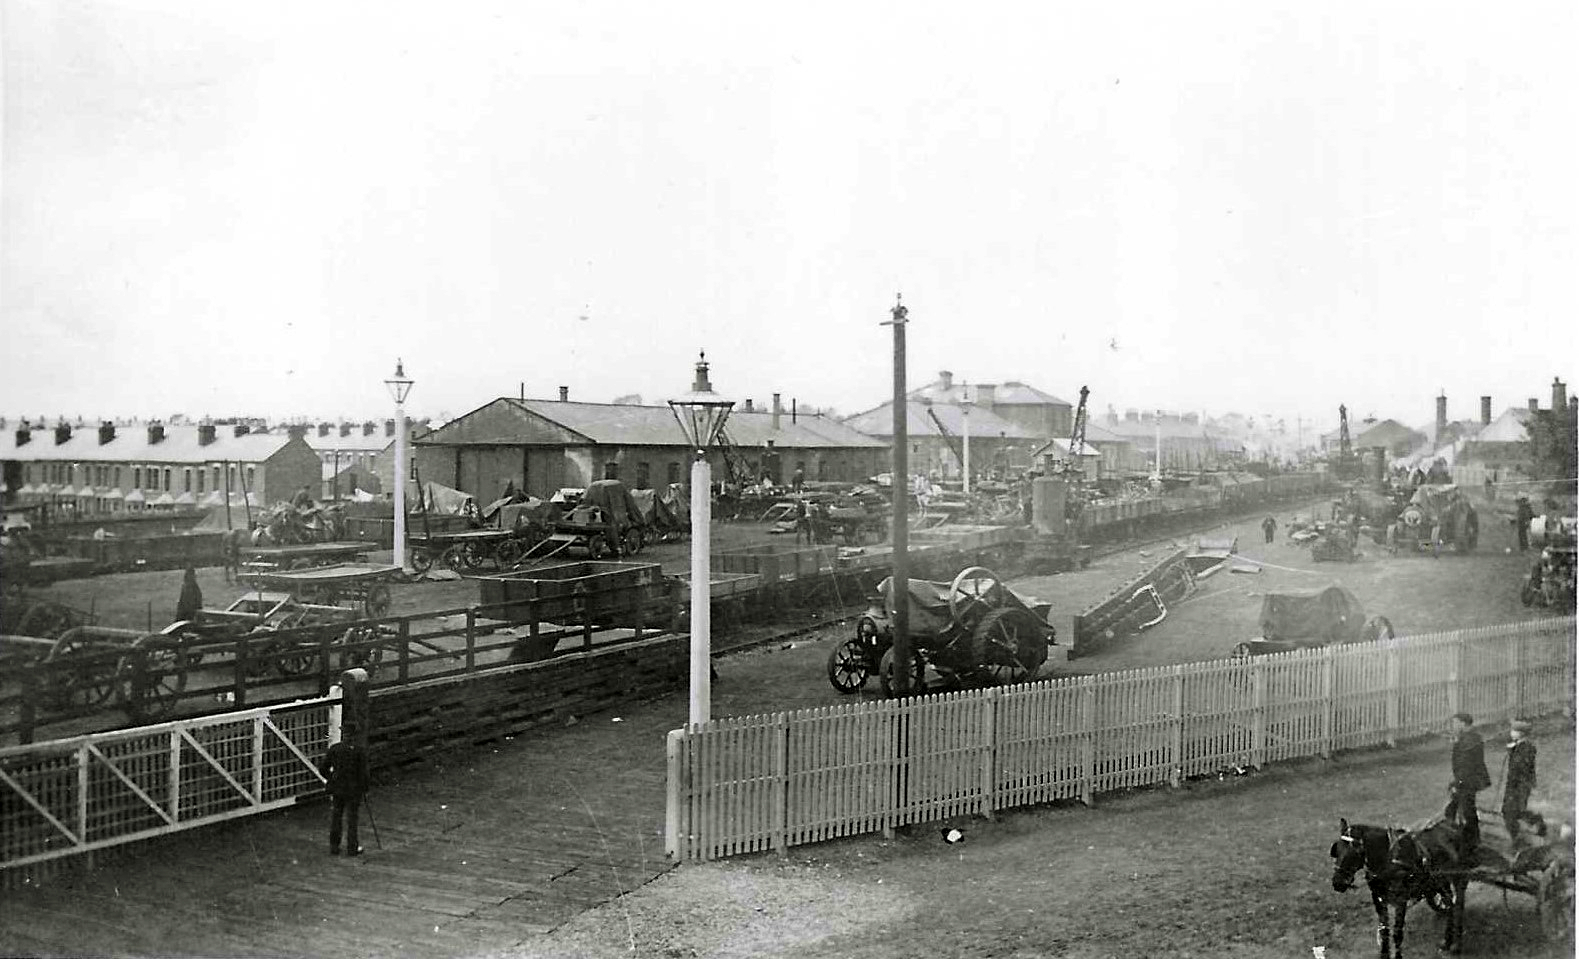 The sidings between the North Road station on the right and the Hopetown carriageworks - where the Tornado steam engine was built recently by the A1 Trust - in the centre had earth and timber platforms built specially to handle goods coming to the 1895